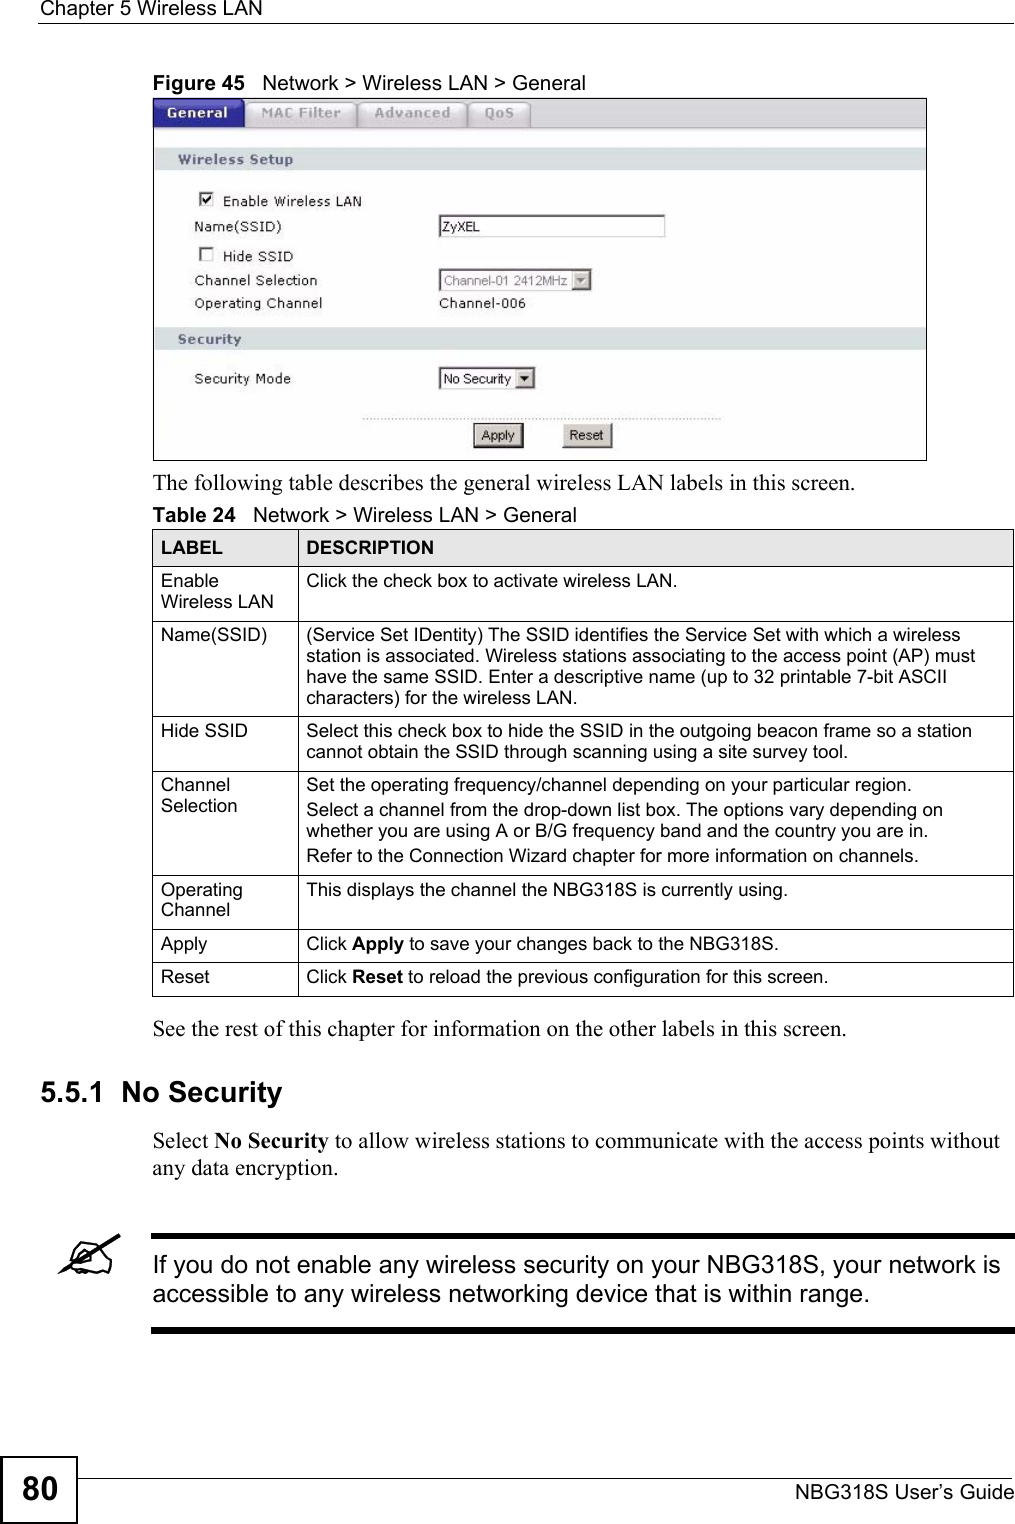 Chapter 5 Wireless LANNBG318S User’s Guide80Figure 45   Network &gt; Wireless LAN &gt; General The following table describes the general wireless LAN labels in this screen.See the rest of this chapter for information on the other labels in this screen. 5.5.1  No SecuritySelect No Security to allow wireless stations to communicate with the access points without any data encryption. &quot;If you do not enable any wireless security on your NBG318S, your network is accessible to any wireless networking device that is within range.Table 24   Network &gt; Wireless LAN &gt; GeneralLABEL DESCRIPTIONEnable Wireless LANClick the check box to activate wireless LAN.Name(SSID) (Service Set IDentity) The SSID identifies the Service Set with which a wireless station is associated. Wireless stations associating to the access point (AP) must have the same SSID. Enter a descriptive name (up to 32 printable 7-bit ASCII characters) for the wireless LAN. Hide SSID Select this check box to hide the SSID in the outgoing beacon frame so a station cannot obtain the SSID through scanning using a site survey tool.Channel SelectionSet the operating frequency/channel depending on your particular region. Select a channel from the drop-down list box. The options vary depending on whether you are using A or B/G frequency band and the country you are in. Refer to the Connection Wizard chapter for more information on channels.Operating Channel This displays the channel the NBG318S is currently using.Apply Click Apply to save your changes back to the NBG318S.Reset Click Reset to reload the previous configuration for this screen.